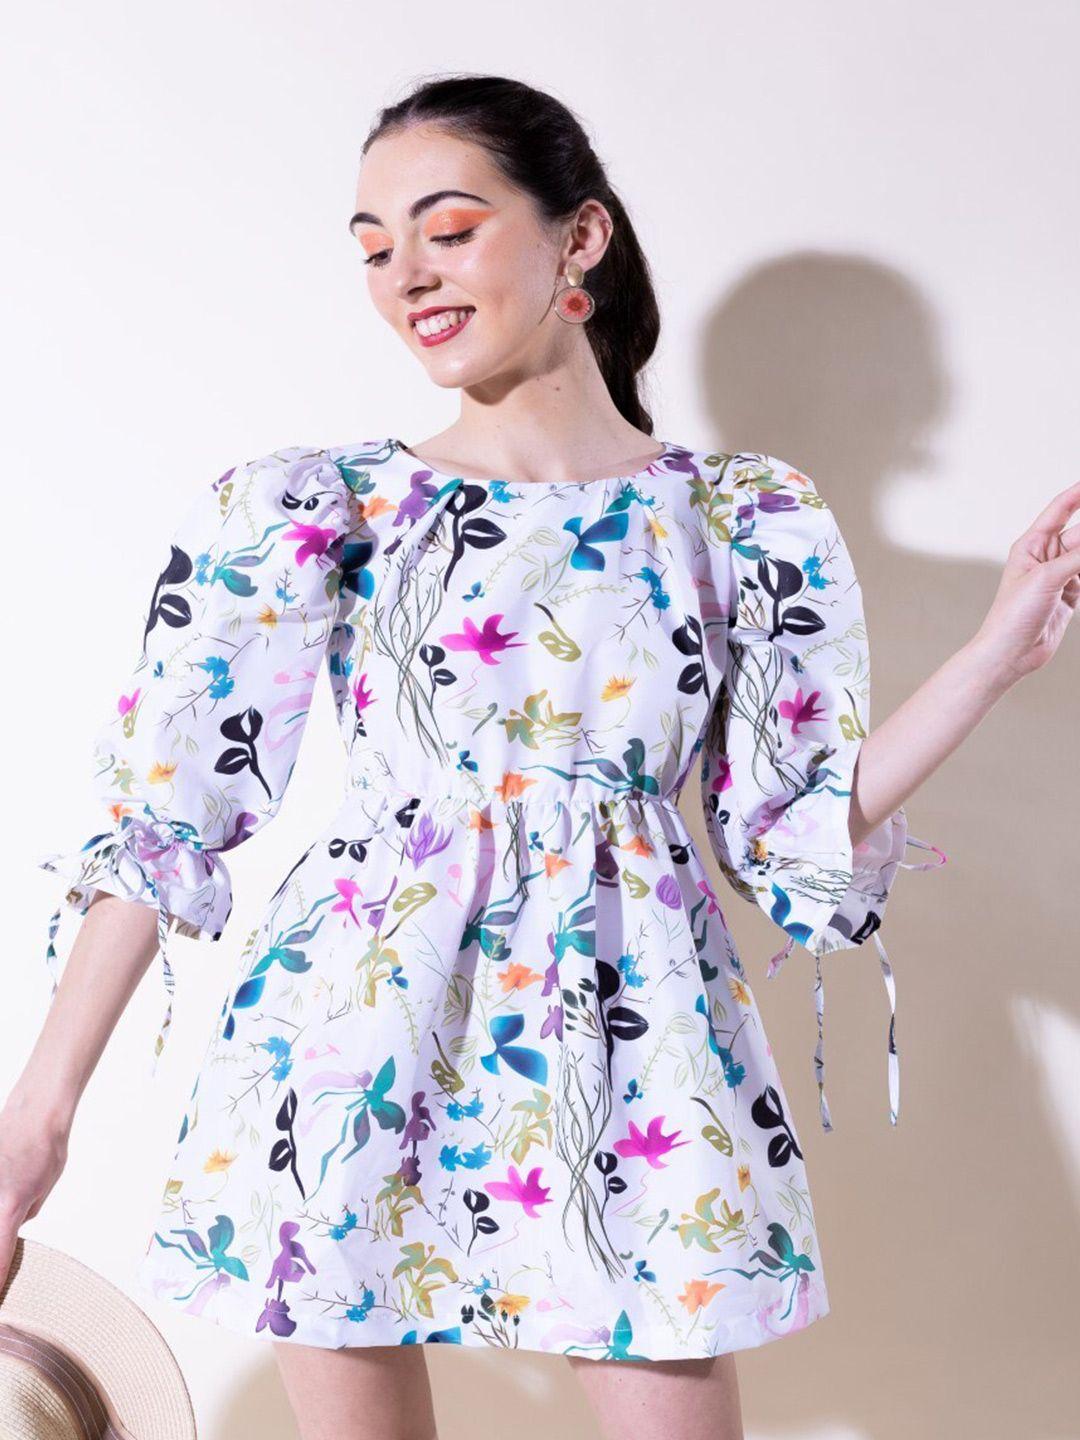 stylecast-x-hersheinbox-floral-print-puff-sleeves-cotton-fit-&-flare-dress